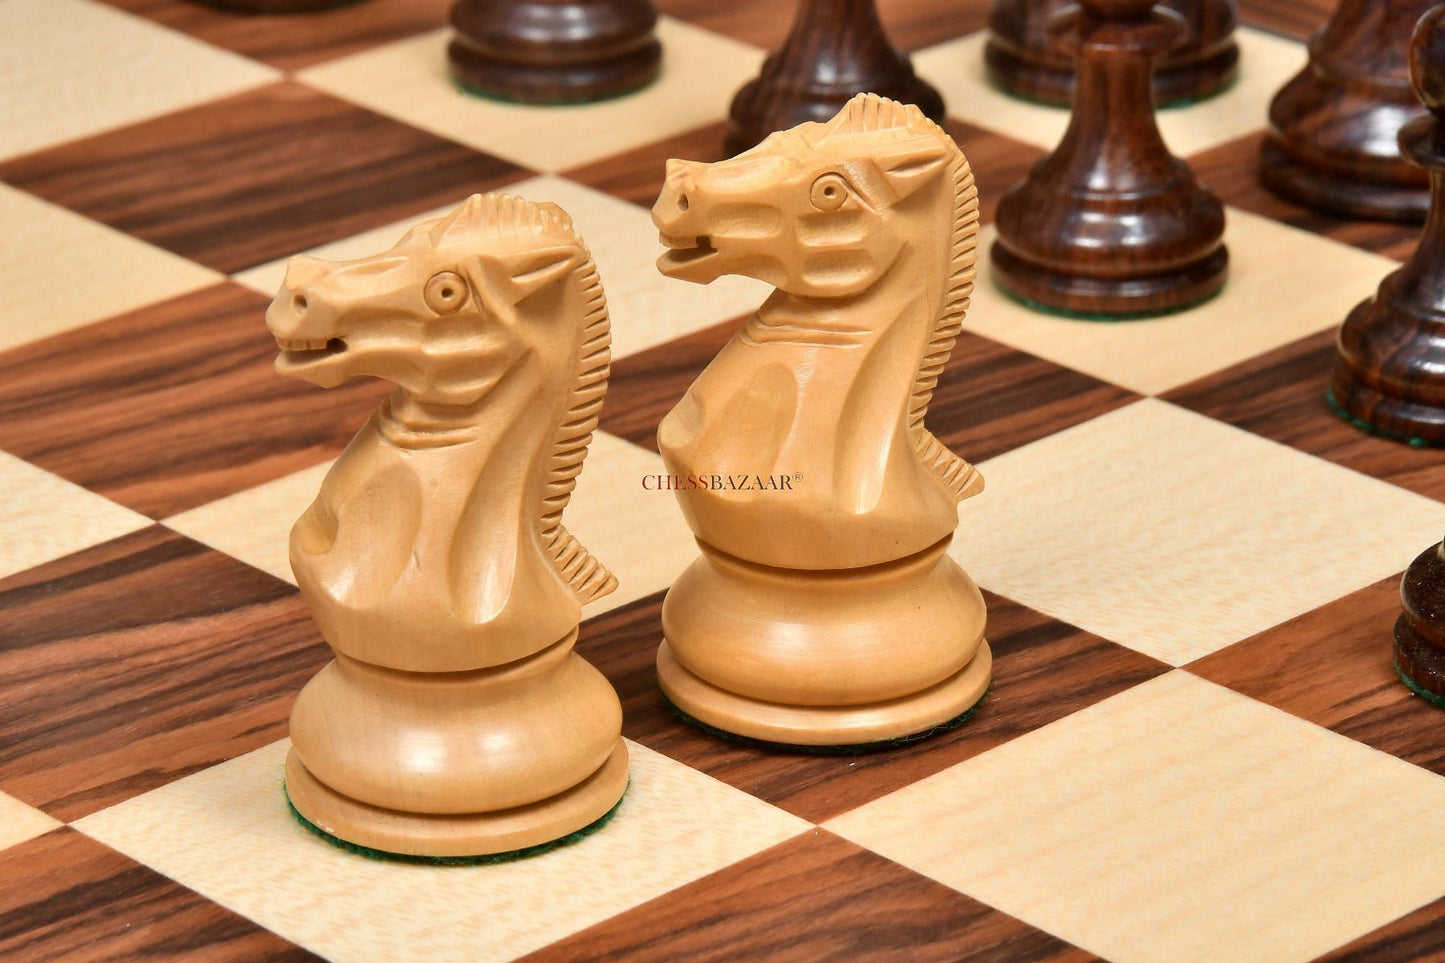 The Professional Series Tournament Staunton Weighted Chess Pieces in Indian Rosewood and Boxwood - 3.8" King